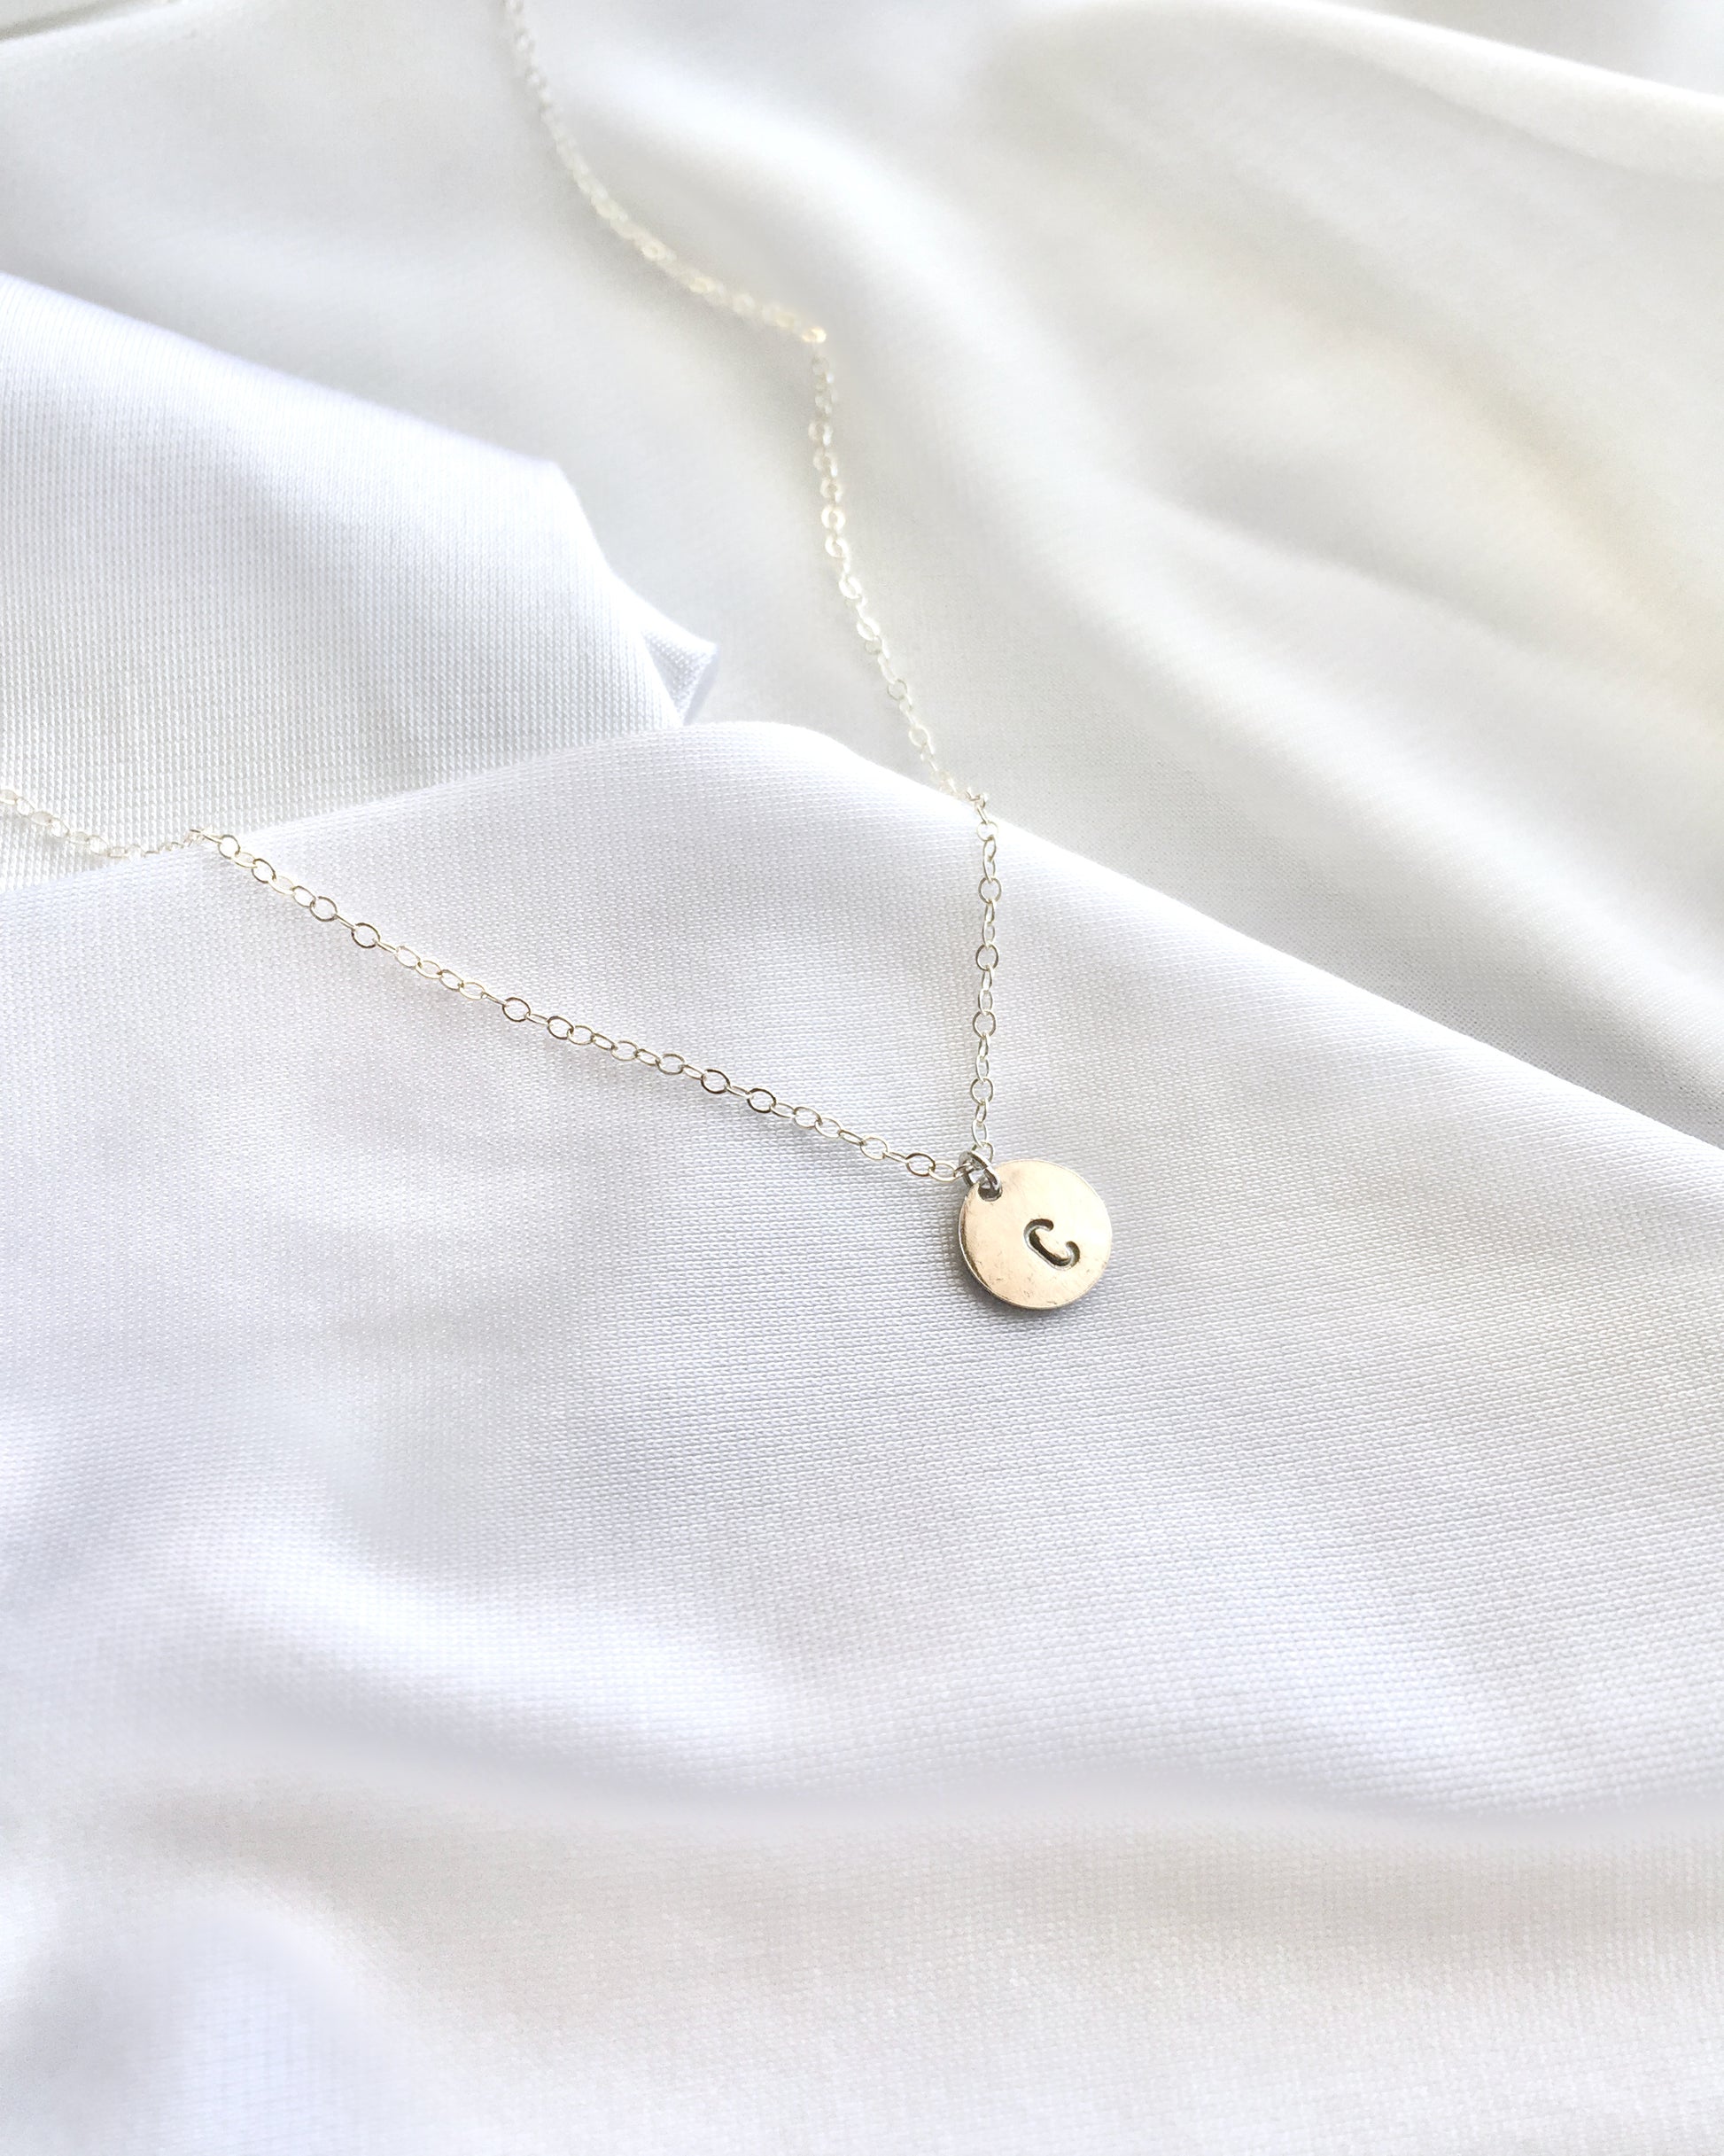 Minimal Initial Necklace | Dainty Initial Disc Necklace | Delicate Everyday Necklace | IB Jewelry